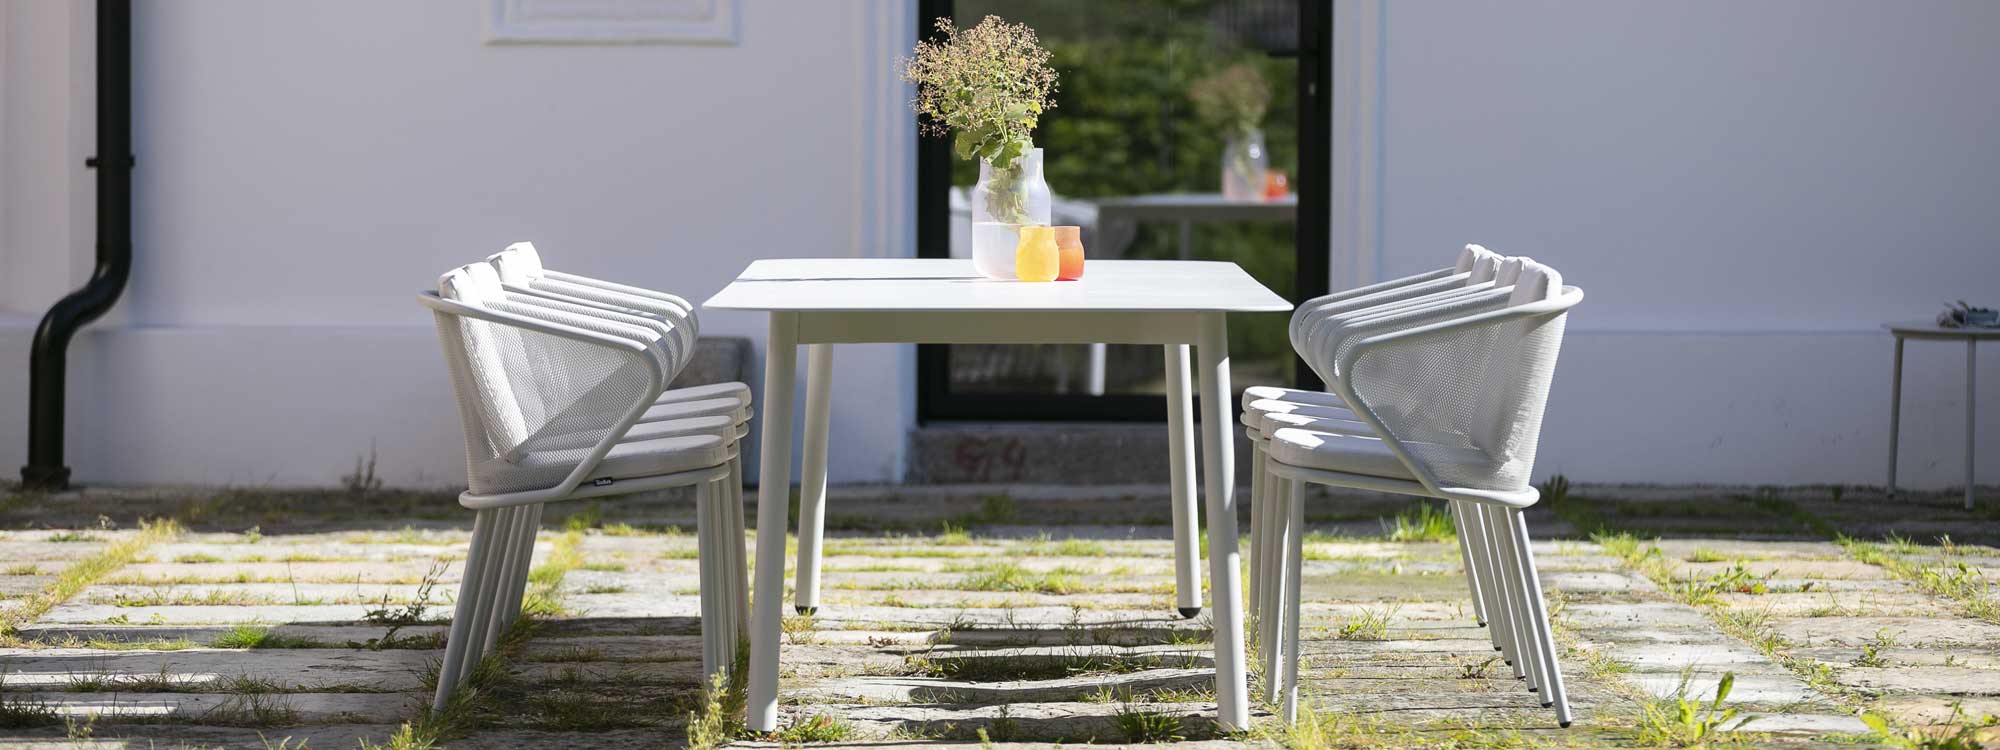 Image of Starling 10 seat garden dining table and Condor chairs in White stainless steel on rustic terrace